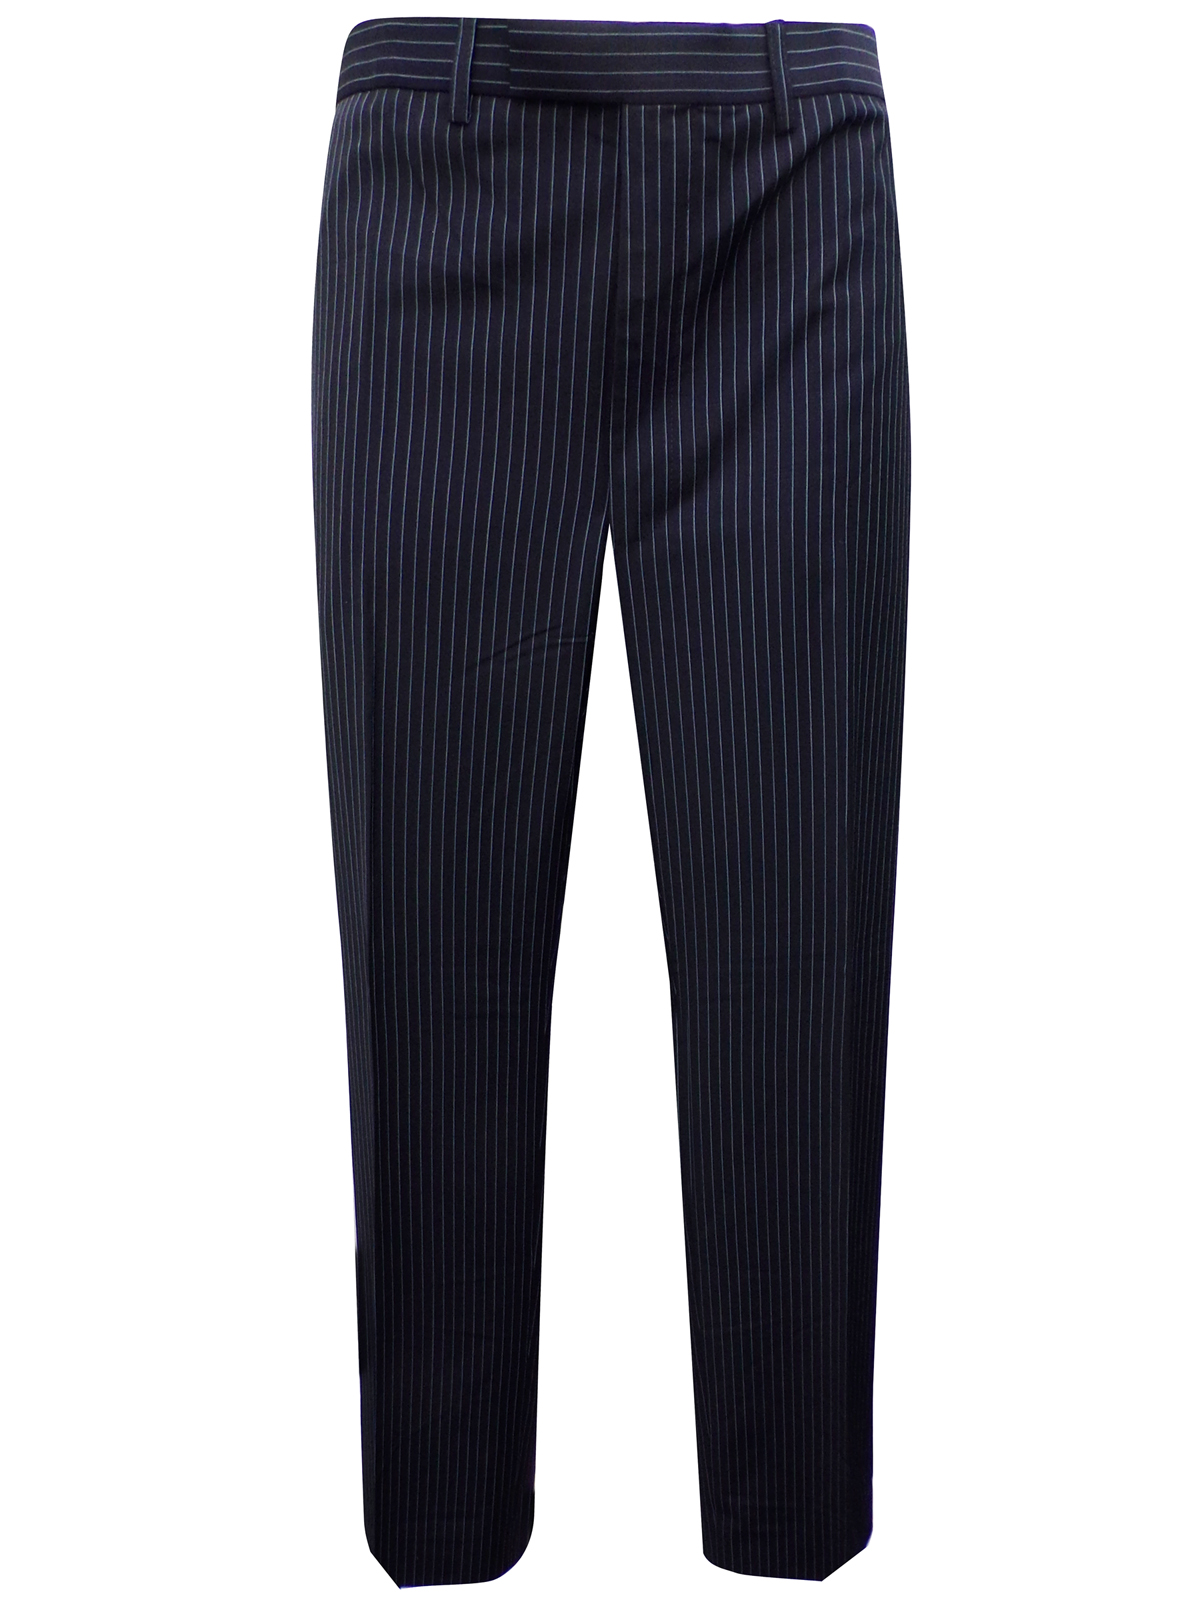 Marks and Spencer - - M&5 NAVY Wool Blend Flat Front Pinstripe - Waist ...